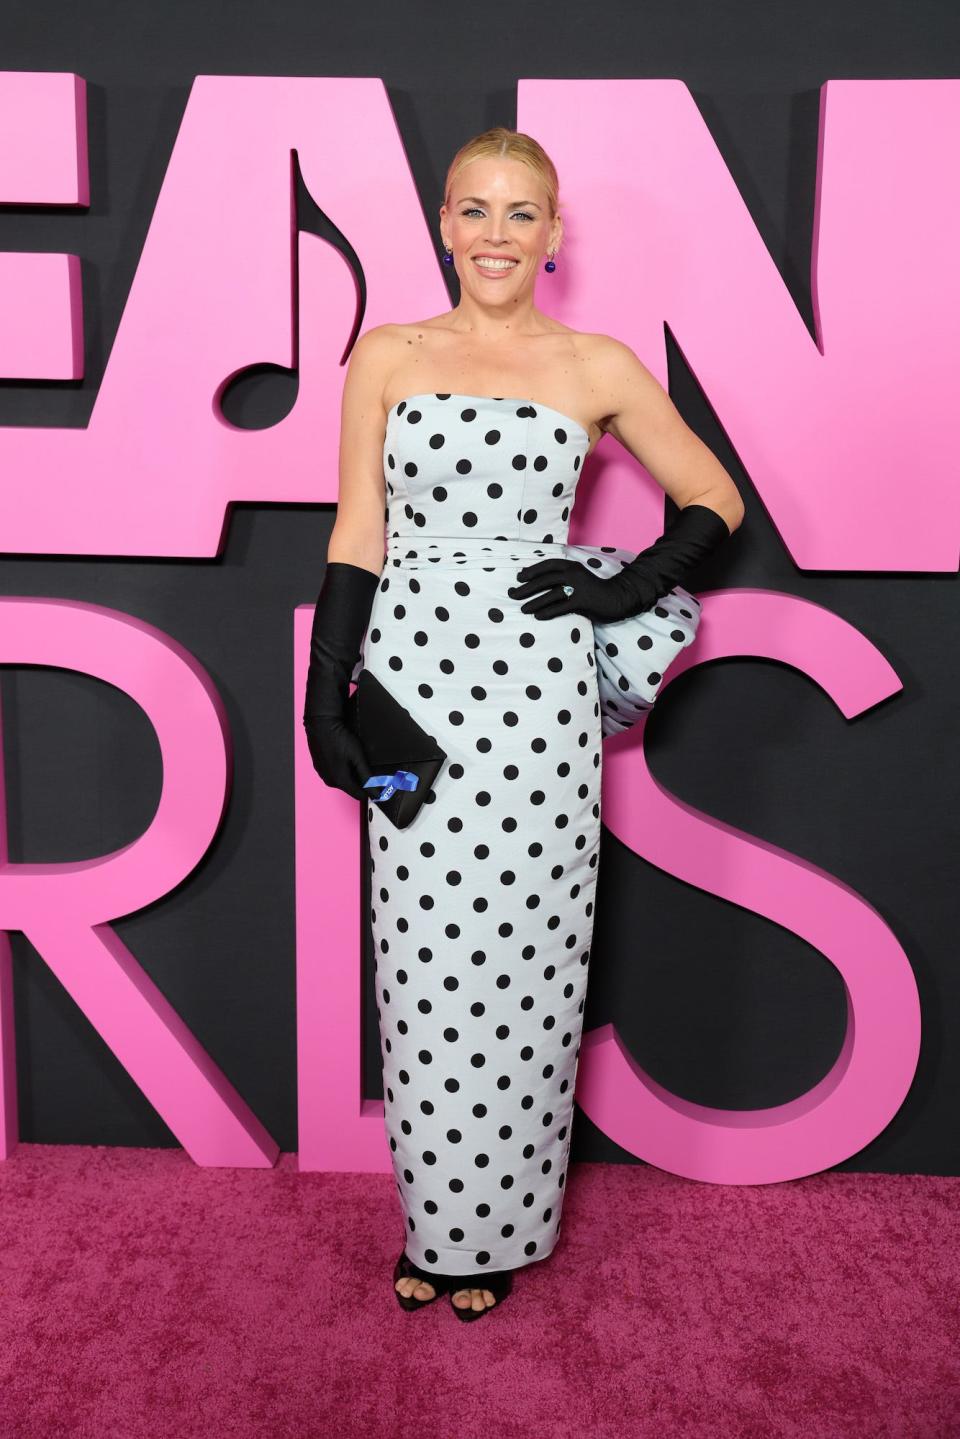 Busy Philipps attends the "Mean Girls" premiere.